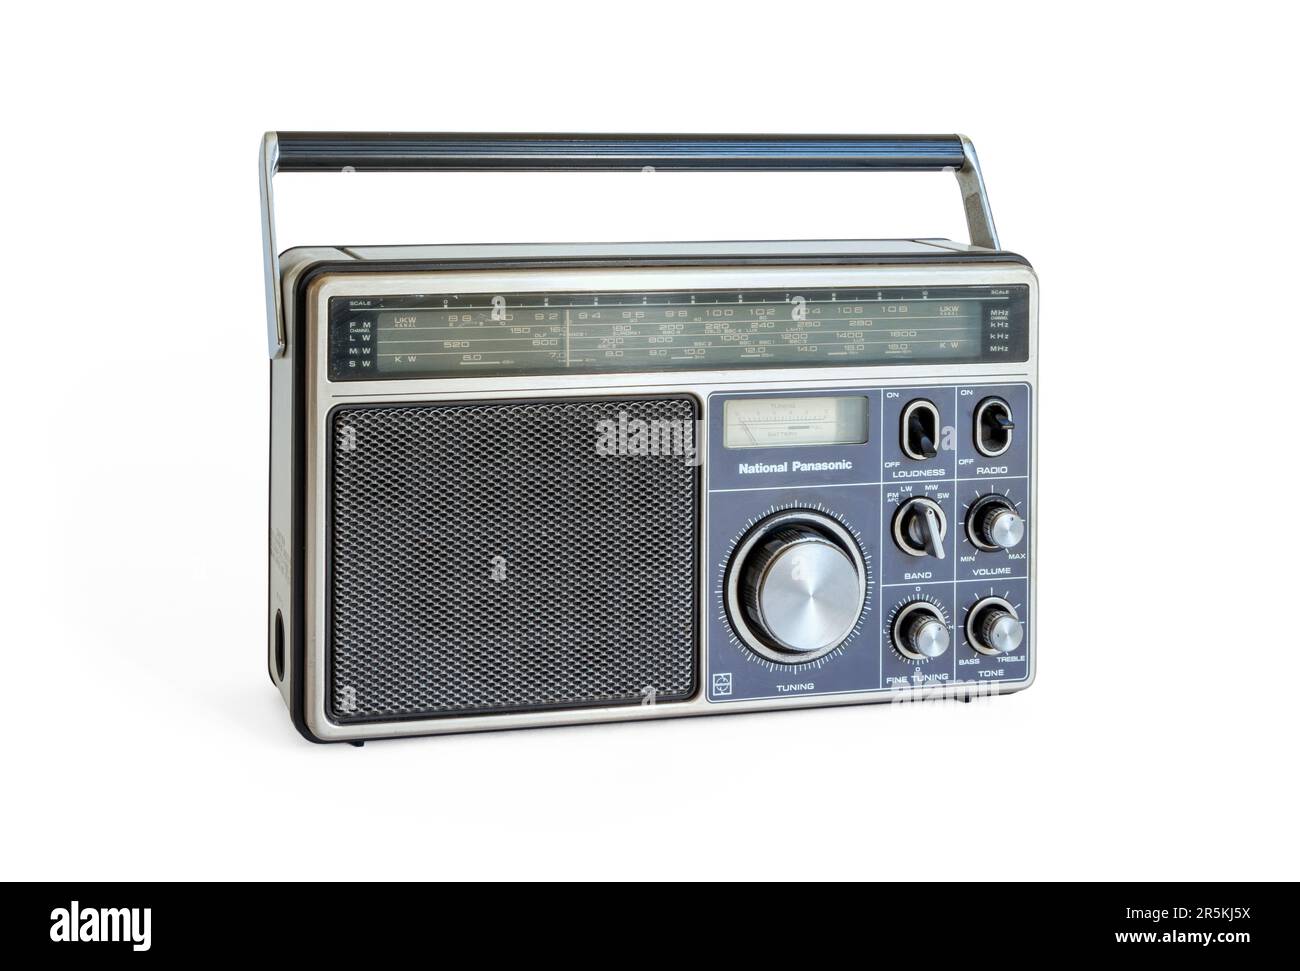 National Panasonic  RF-1110 LBS transistor radio from 1978, isolated on a white background Stock Photo